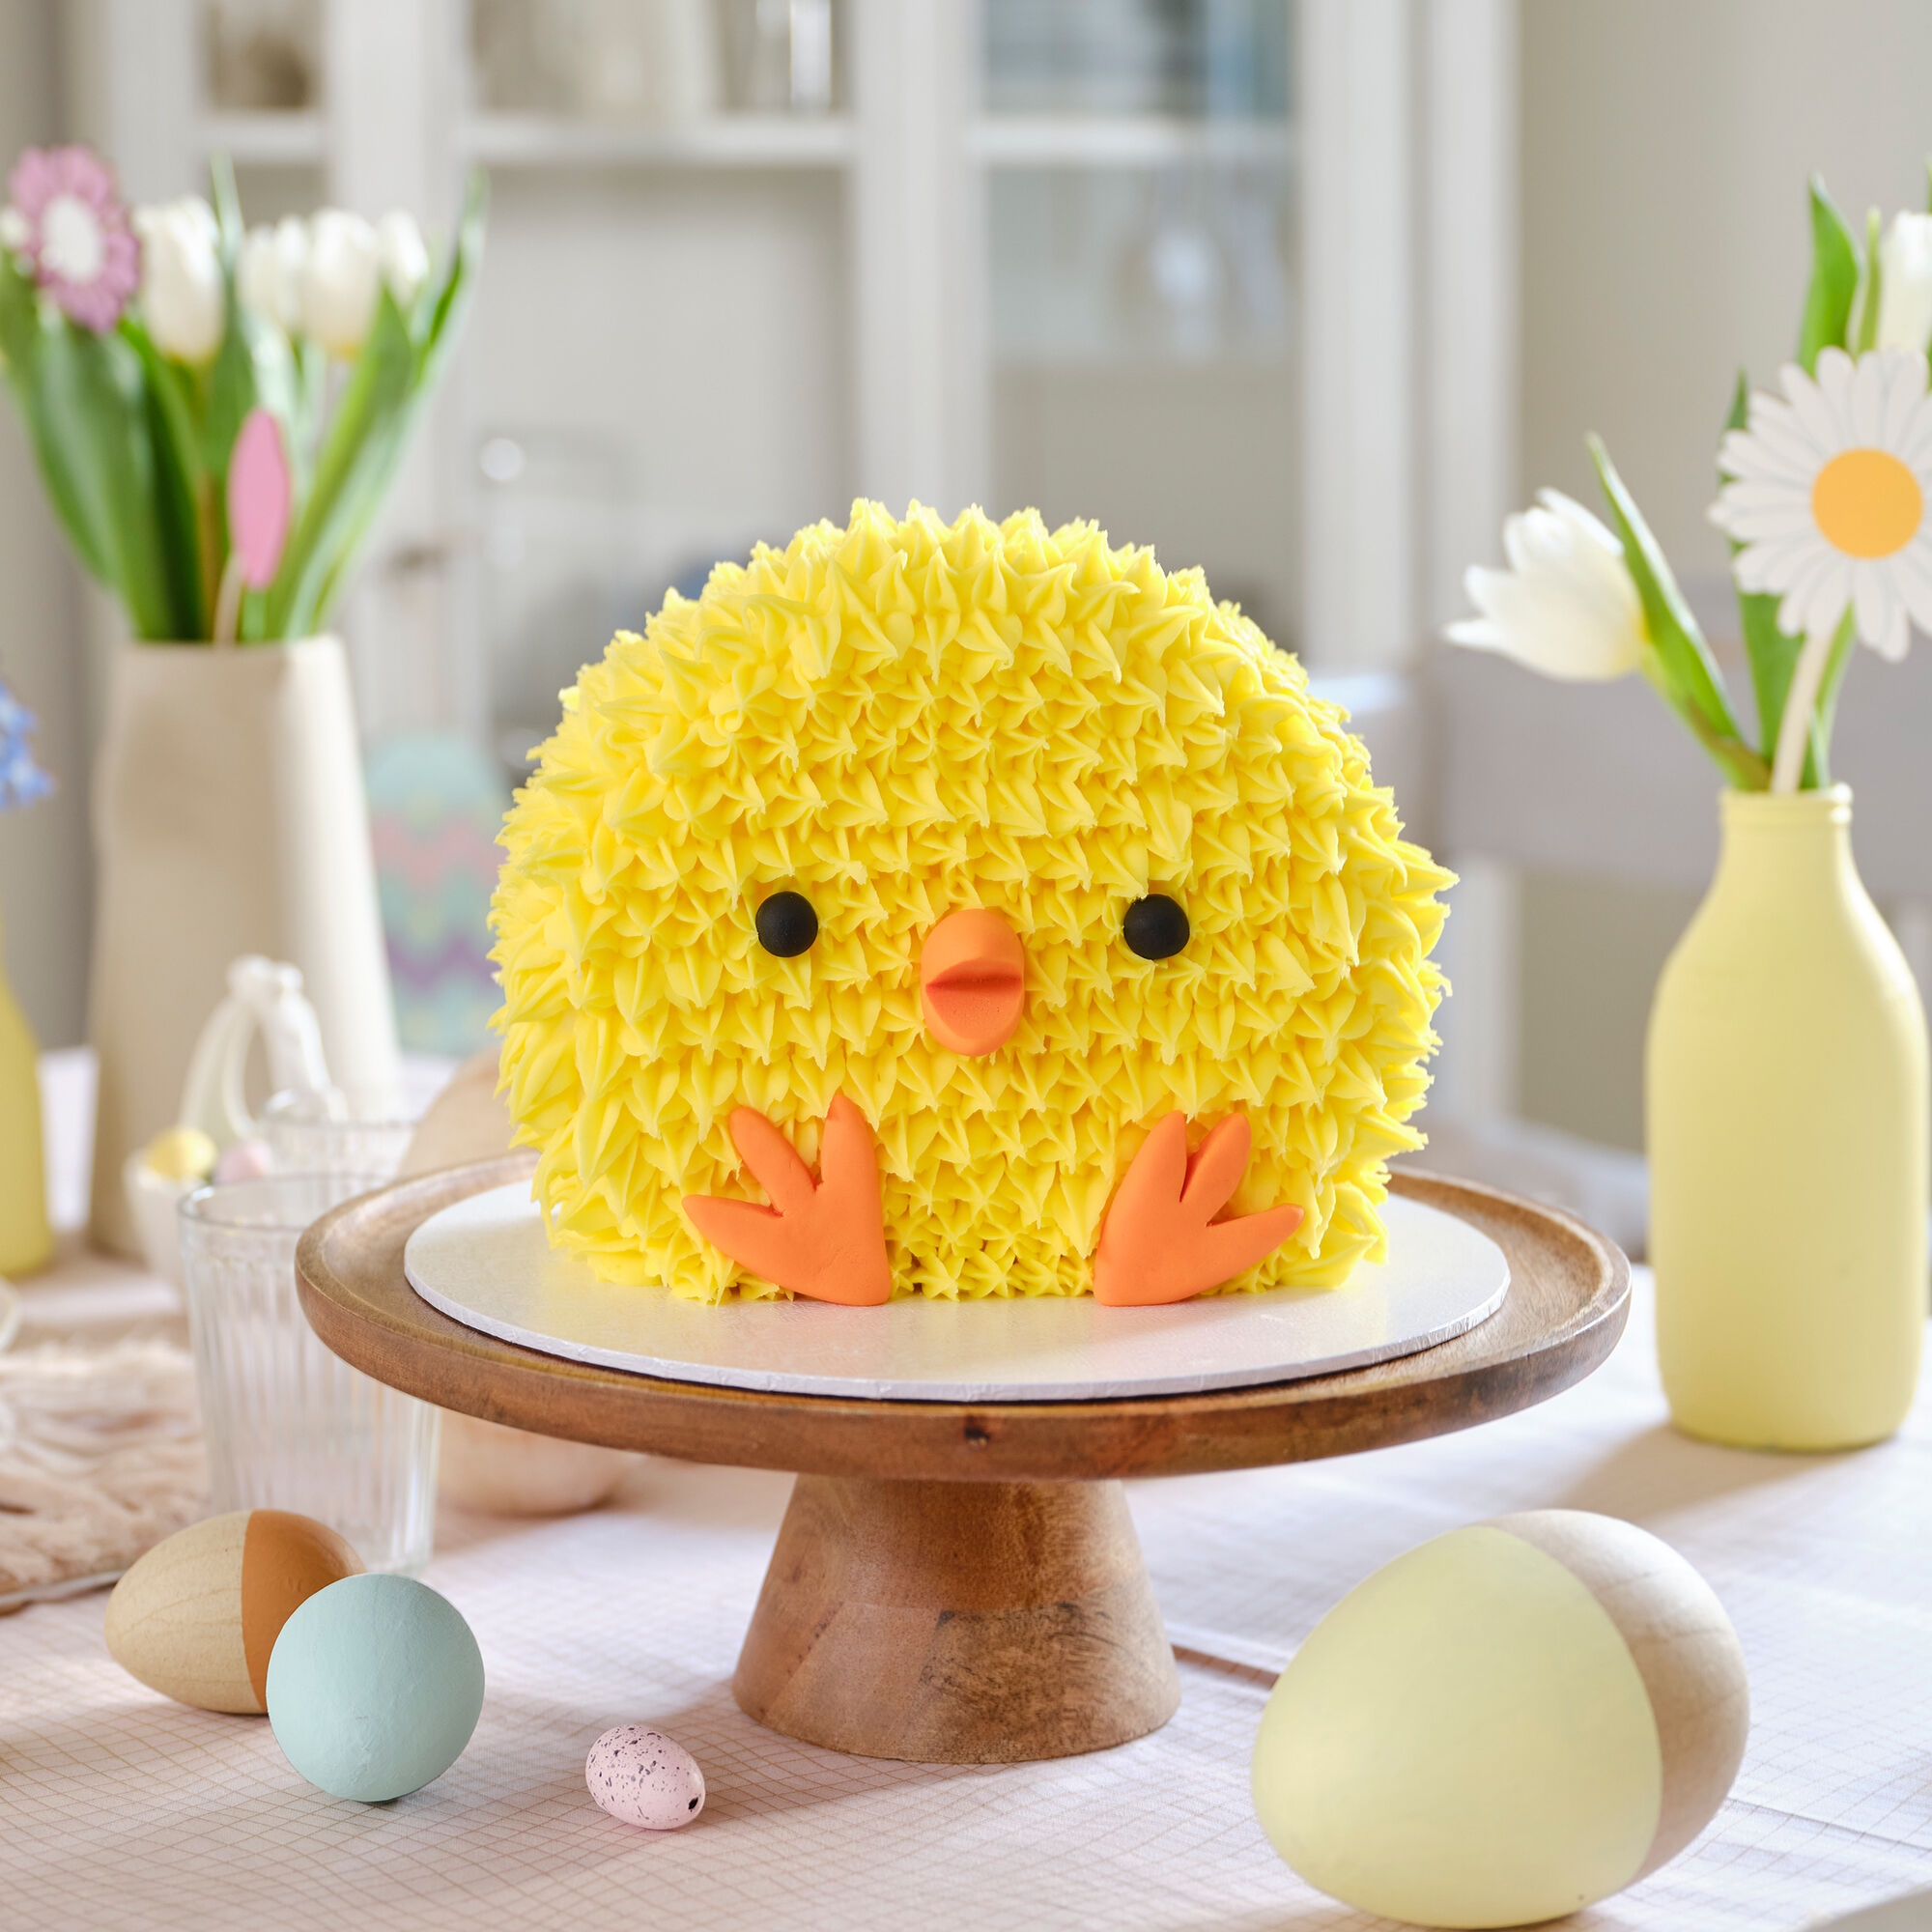 60+ Easter Cakes and Tutorials - My Cake School